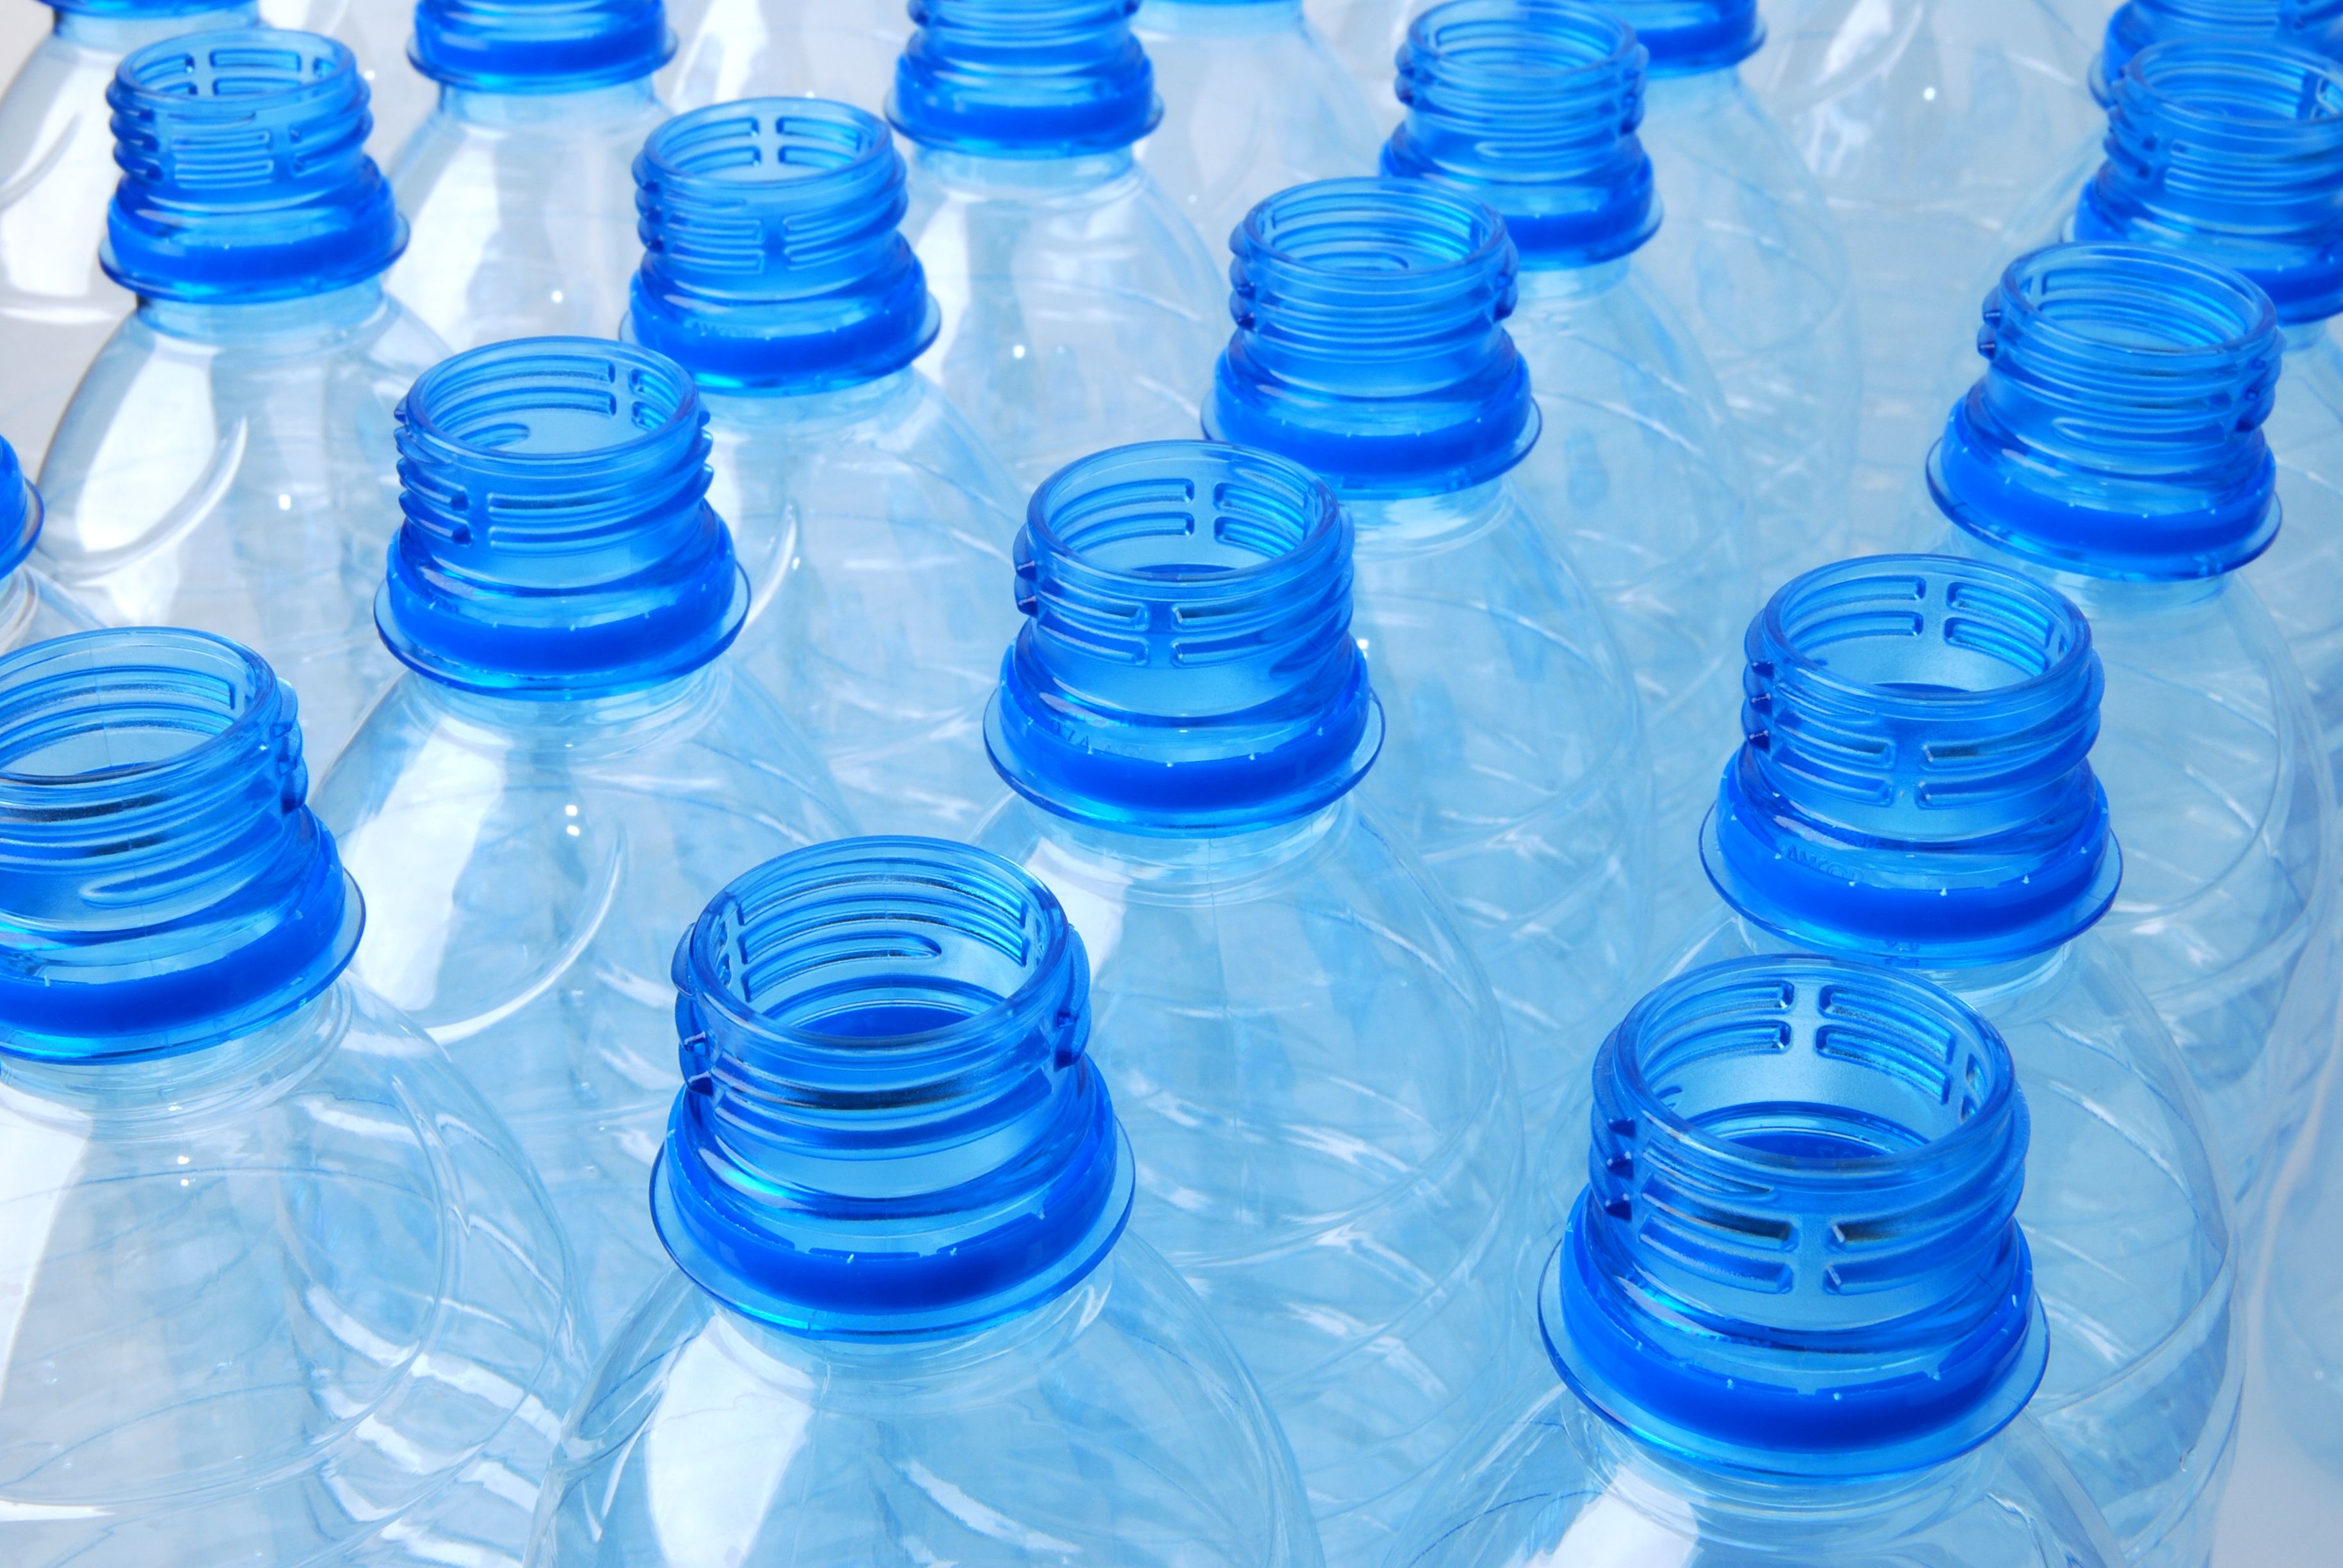 bottled water vs tap water articles